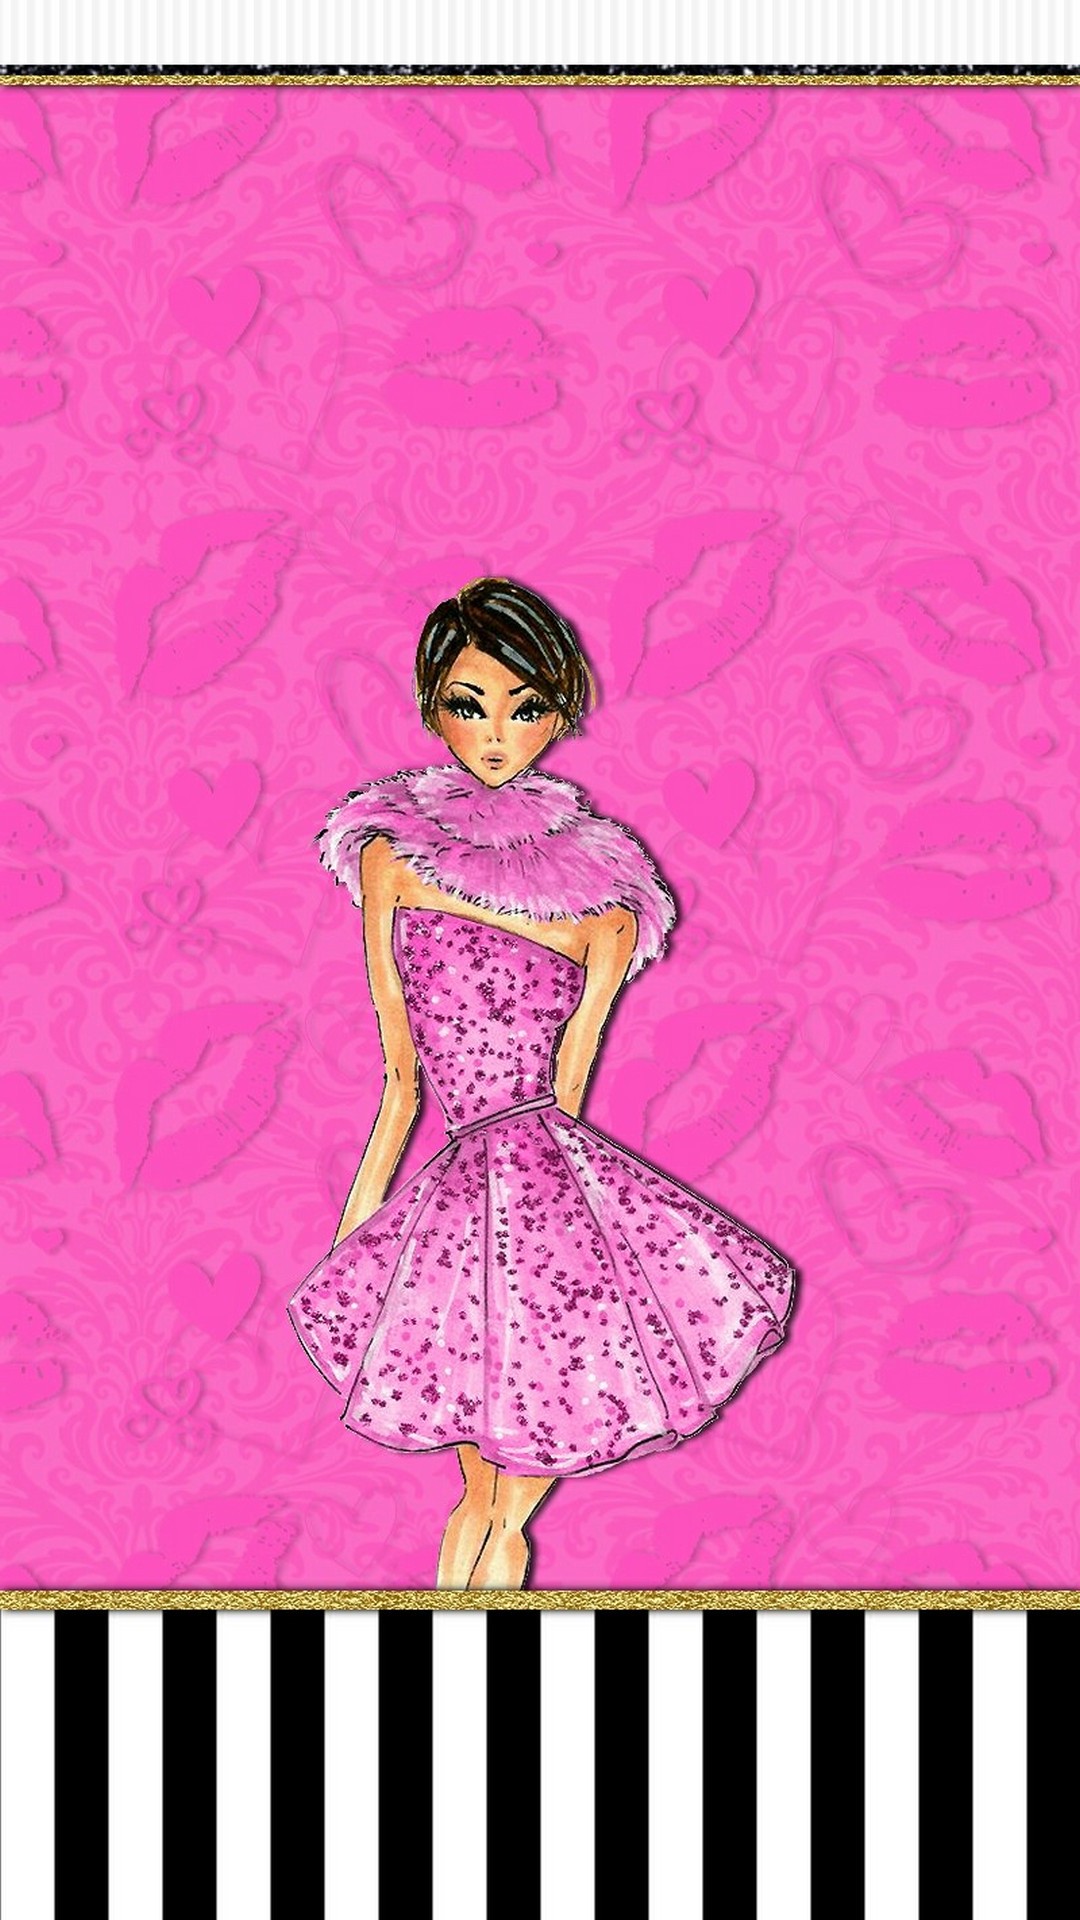 Pink Girly Wallpaper Android